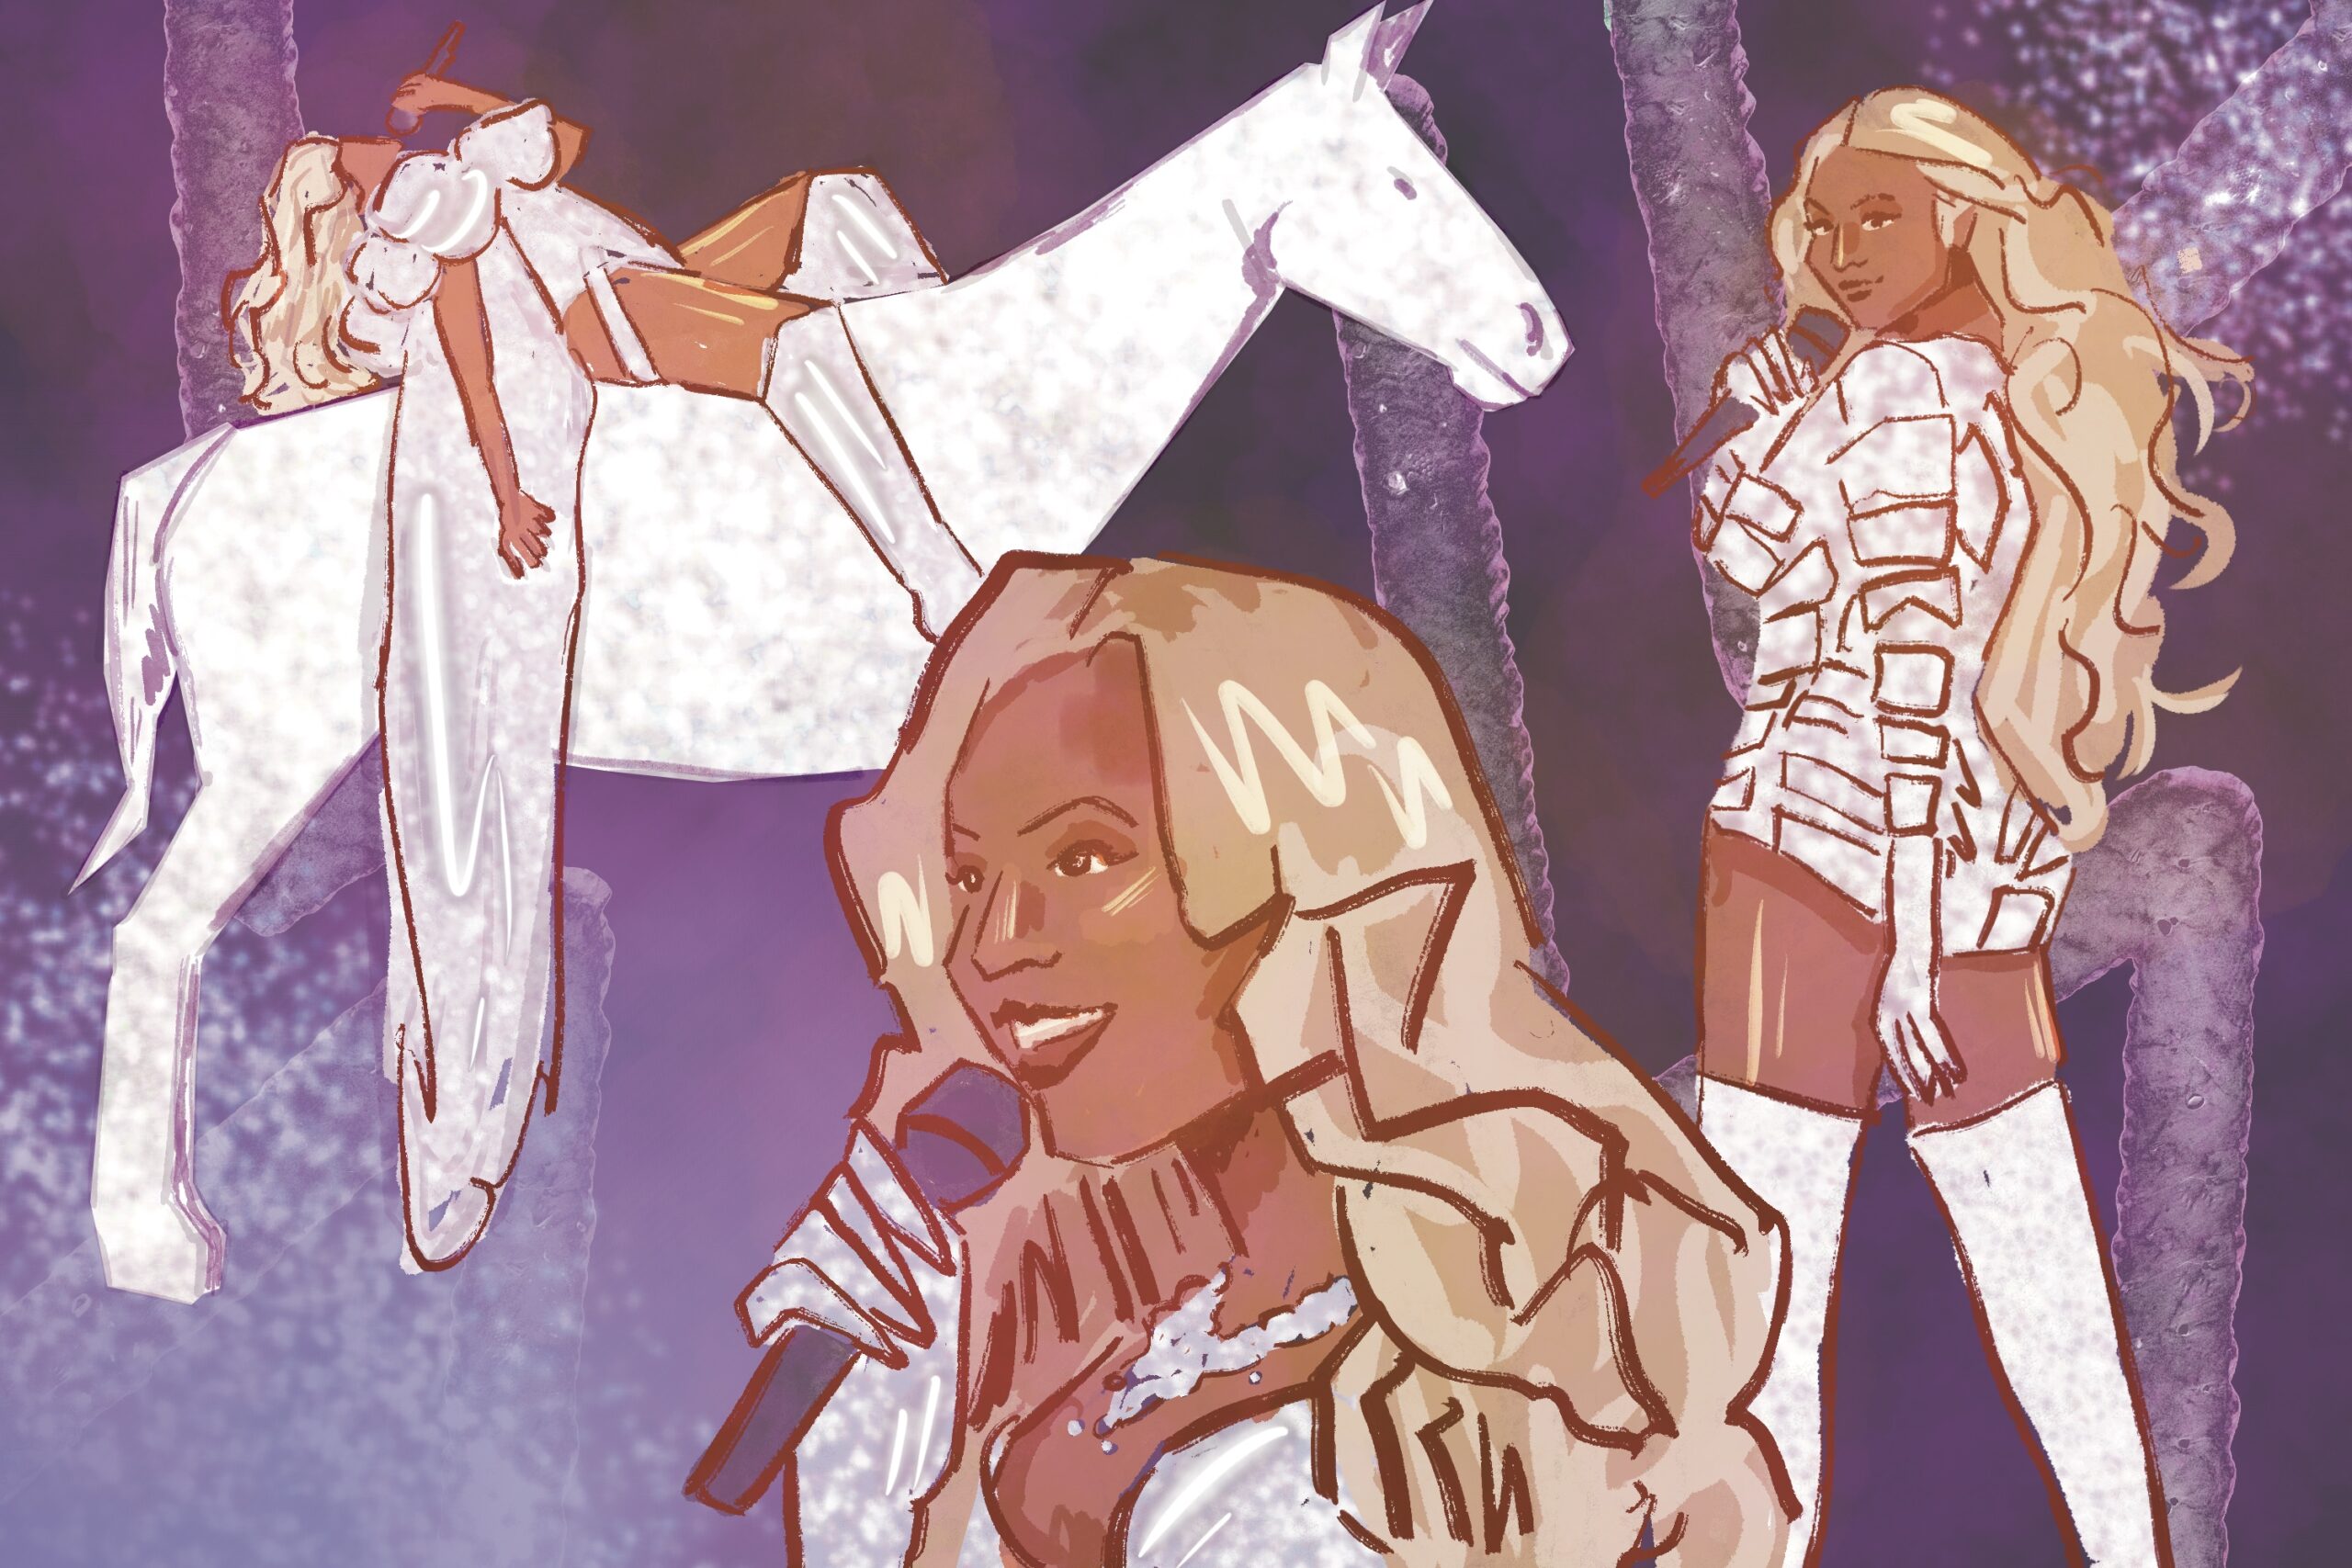 On the left, Beyoncé reclines on horseback on a white horse. On the right, Beyoncé looks over her shoulder with a microphone in her hand. In the middle is a headshot of Beyoncé singing into a microphone.